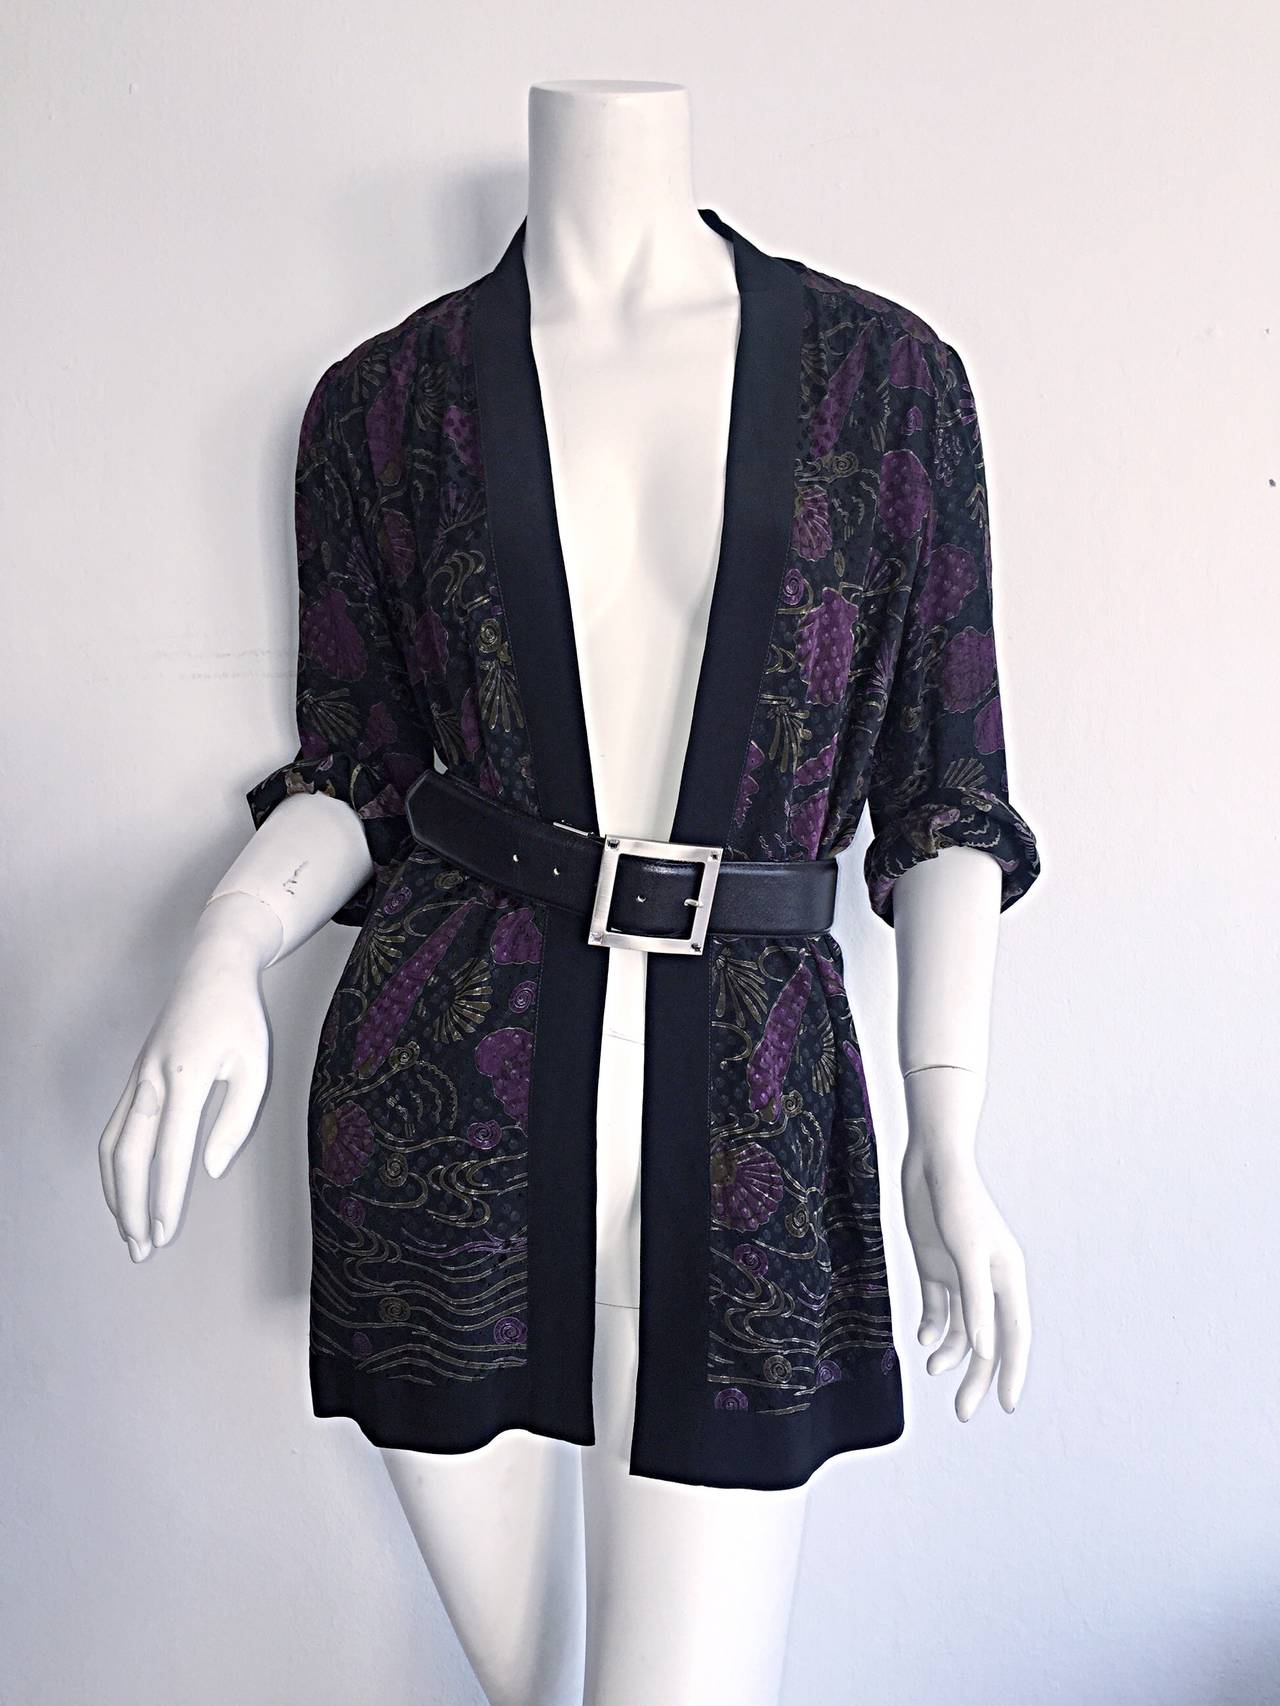 Beautiful vintage Janice Wainwright silk kimono style jacket! Lovely purple fan print throughout. A signature design by this iconic British designer. Looks great alone with jeans and a blouse/tank. Or looks great alone, with a belt. Can easily be